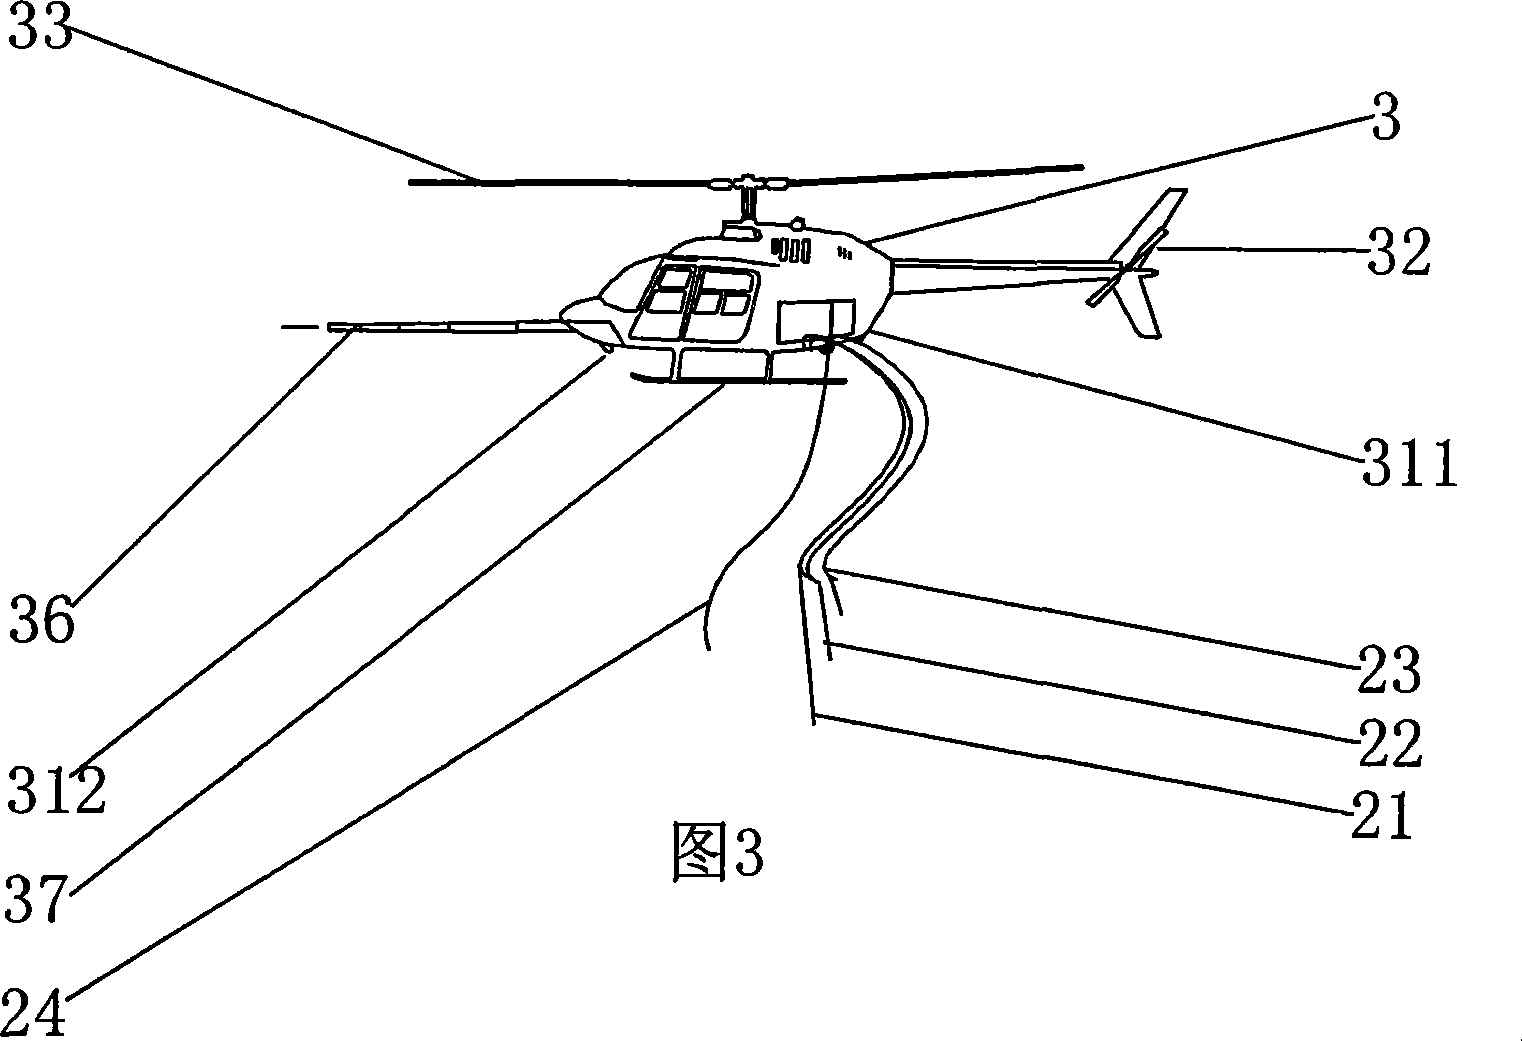 Vehicle-ship carrying electric lifter